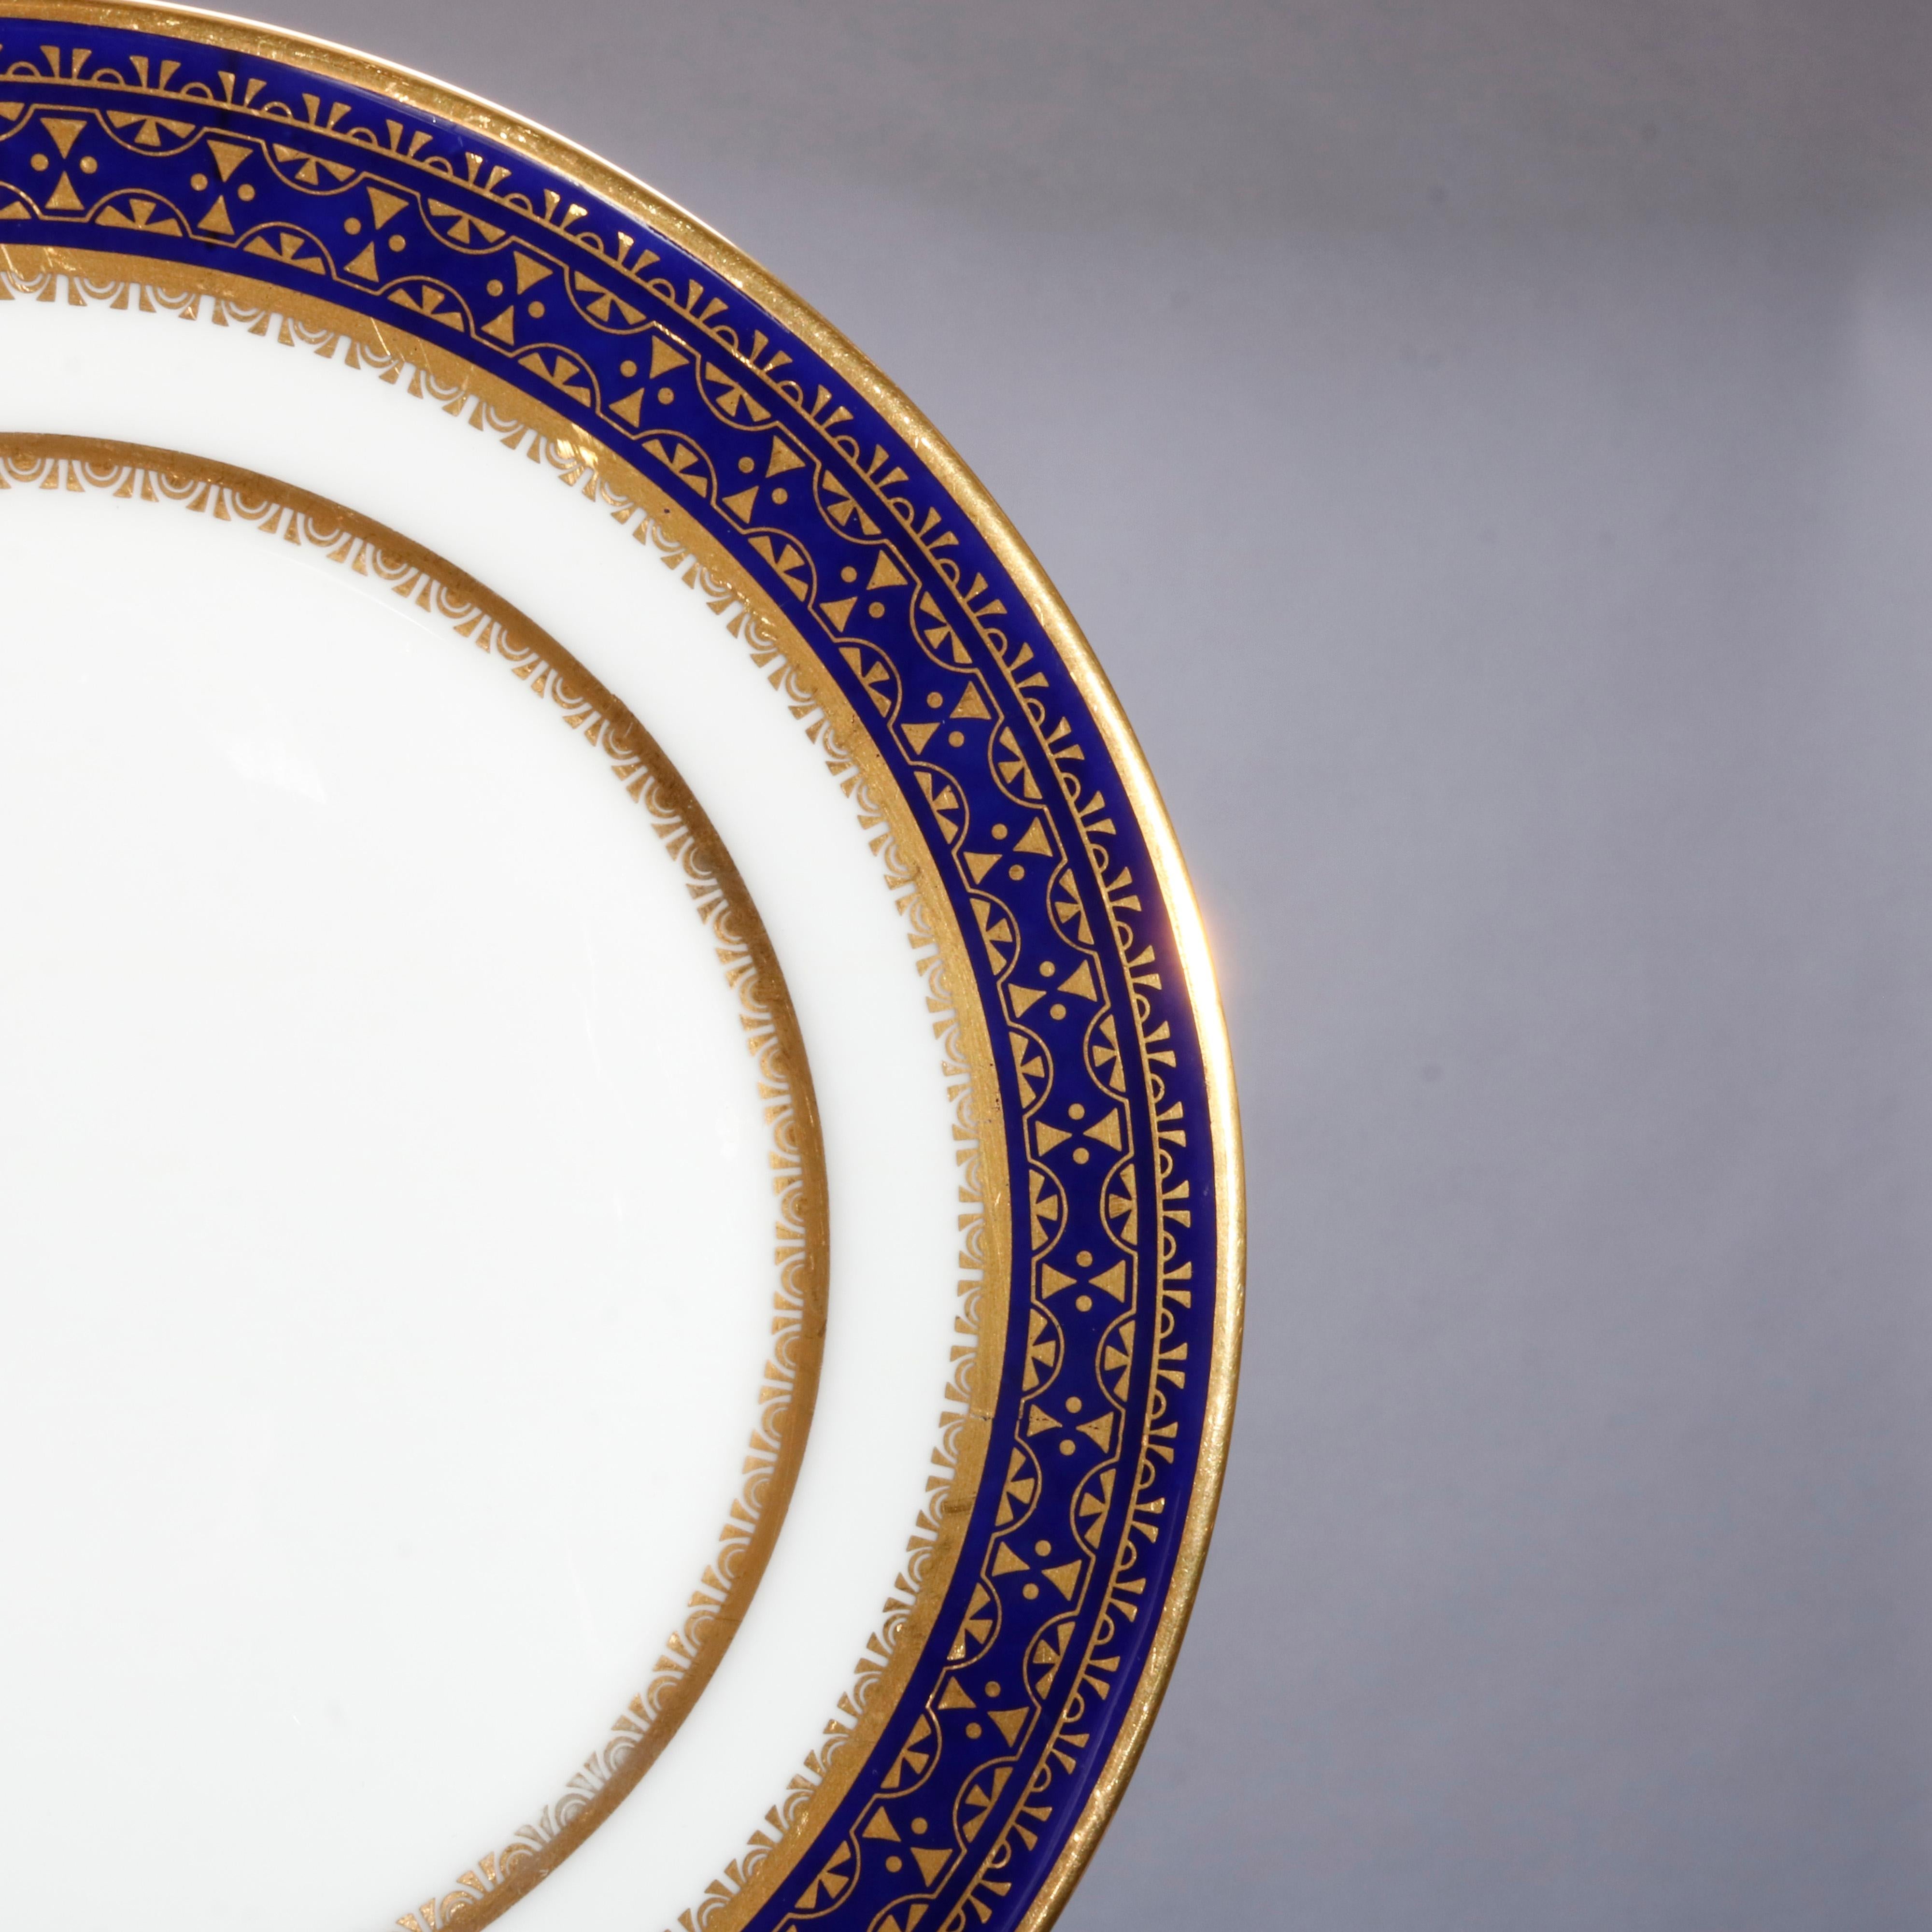 A set of 22 English Oxford bone China salad and bread plates offer cobalt blue bordering with gold gilt highlights, en verso maker mark as photographed, 20th century

Measures: salad 8